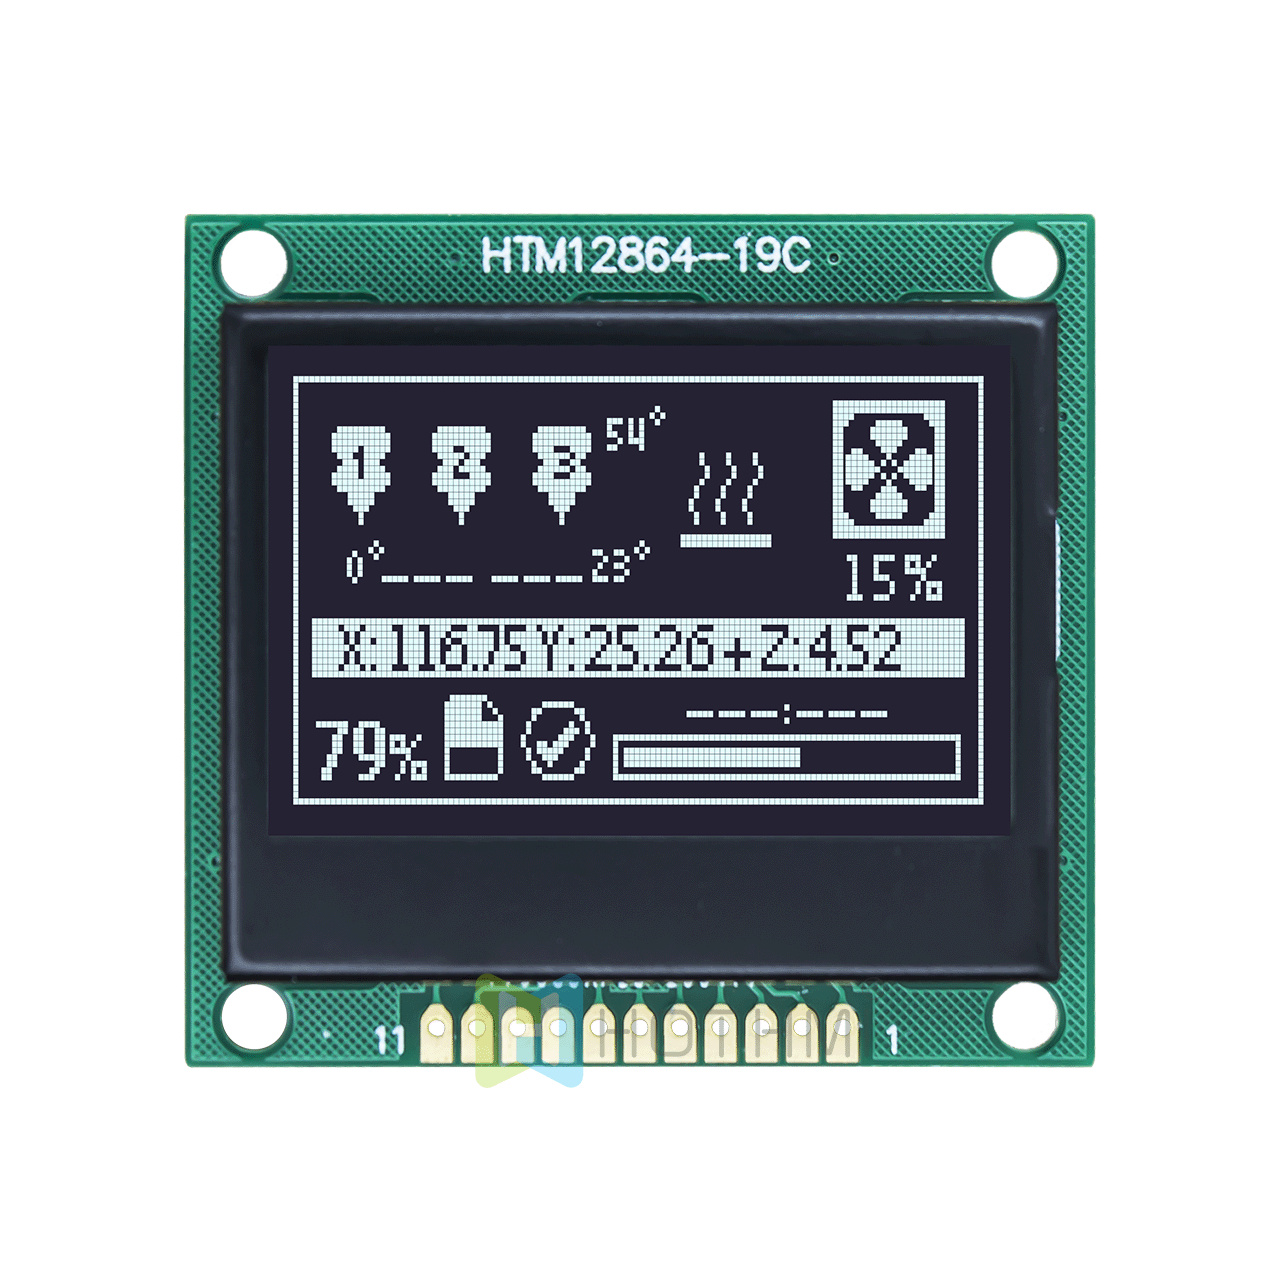 1.7 inch 128 x 64 LCD graphic display | 12864 LCD graphic display module | SPI interface | DSTN negative black background white text display | transflective polarizer